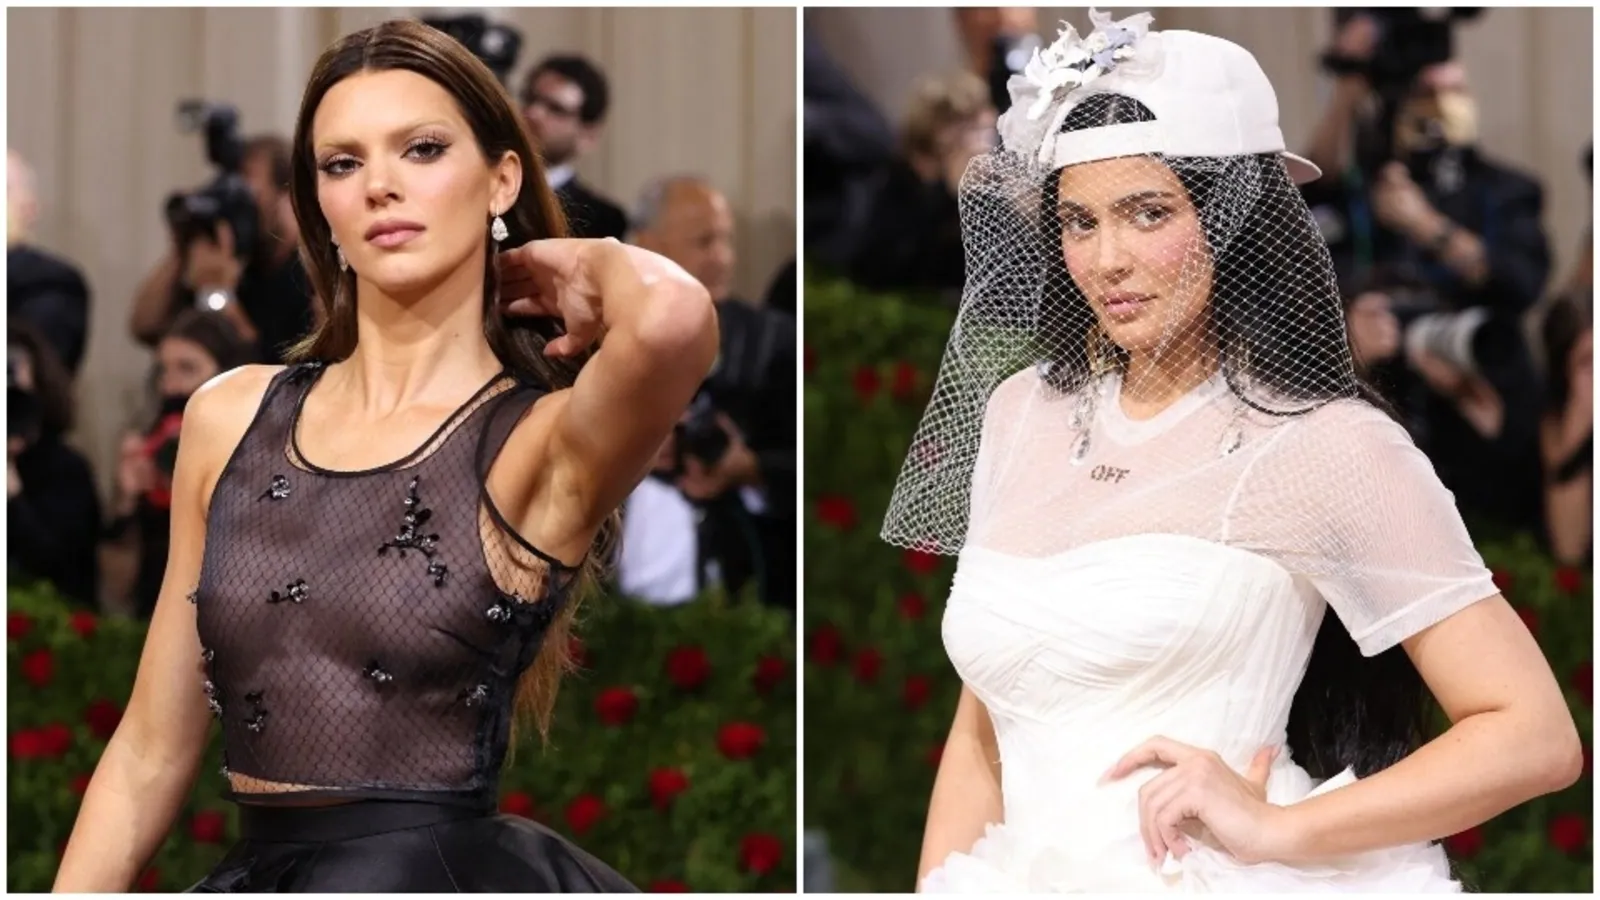 Kendall Jenner with bleached brows, Kylie in wedding dress with baseball cap have a Yin-Yang reunion at Met Gala 2022